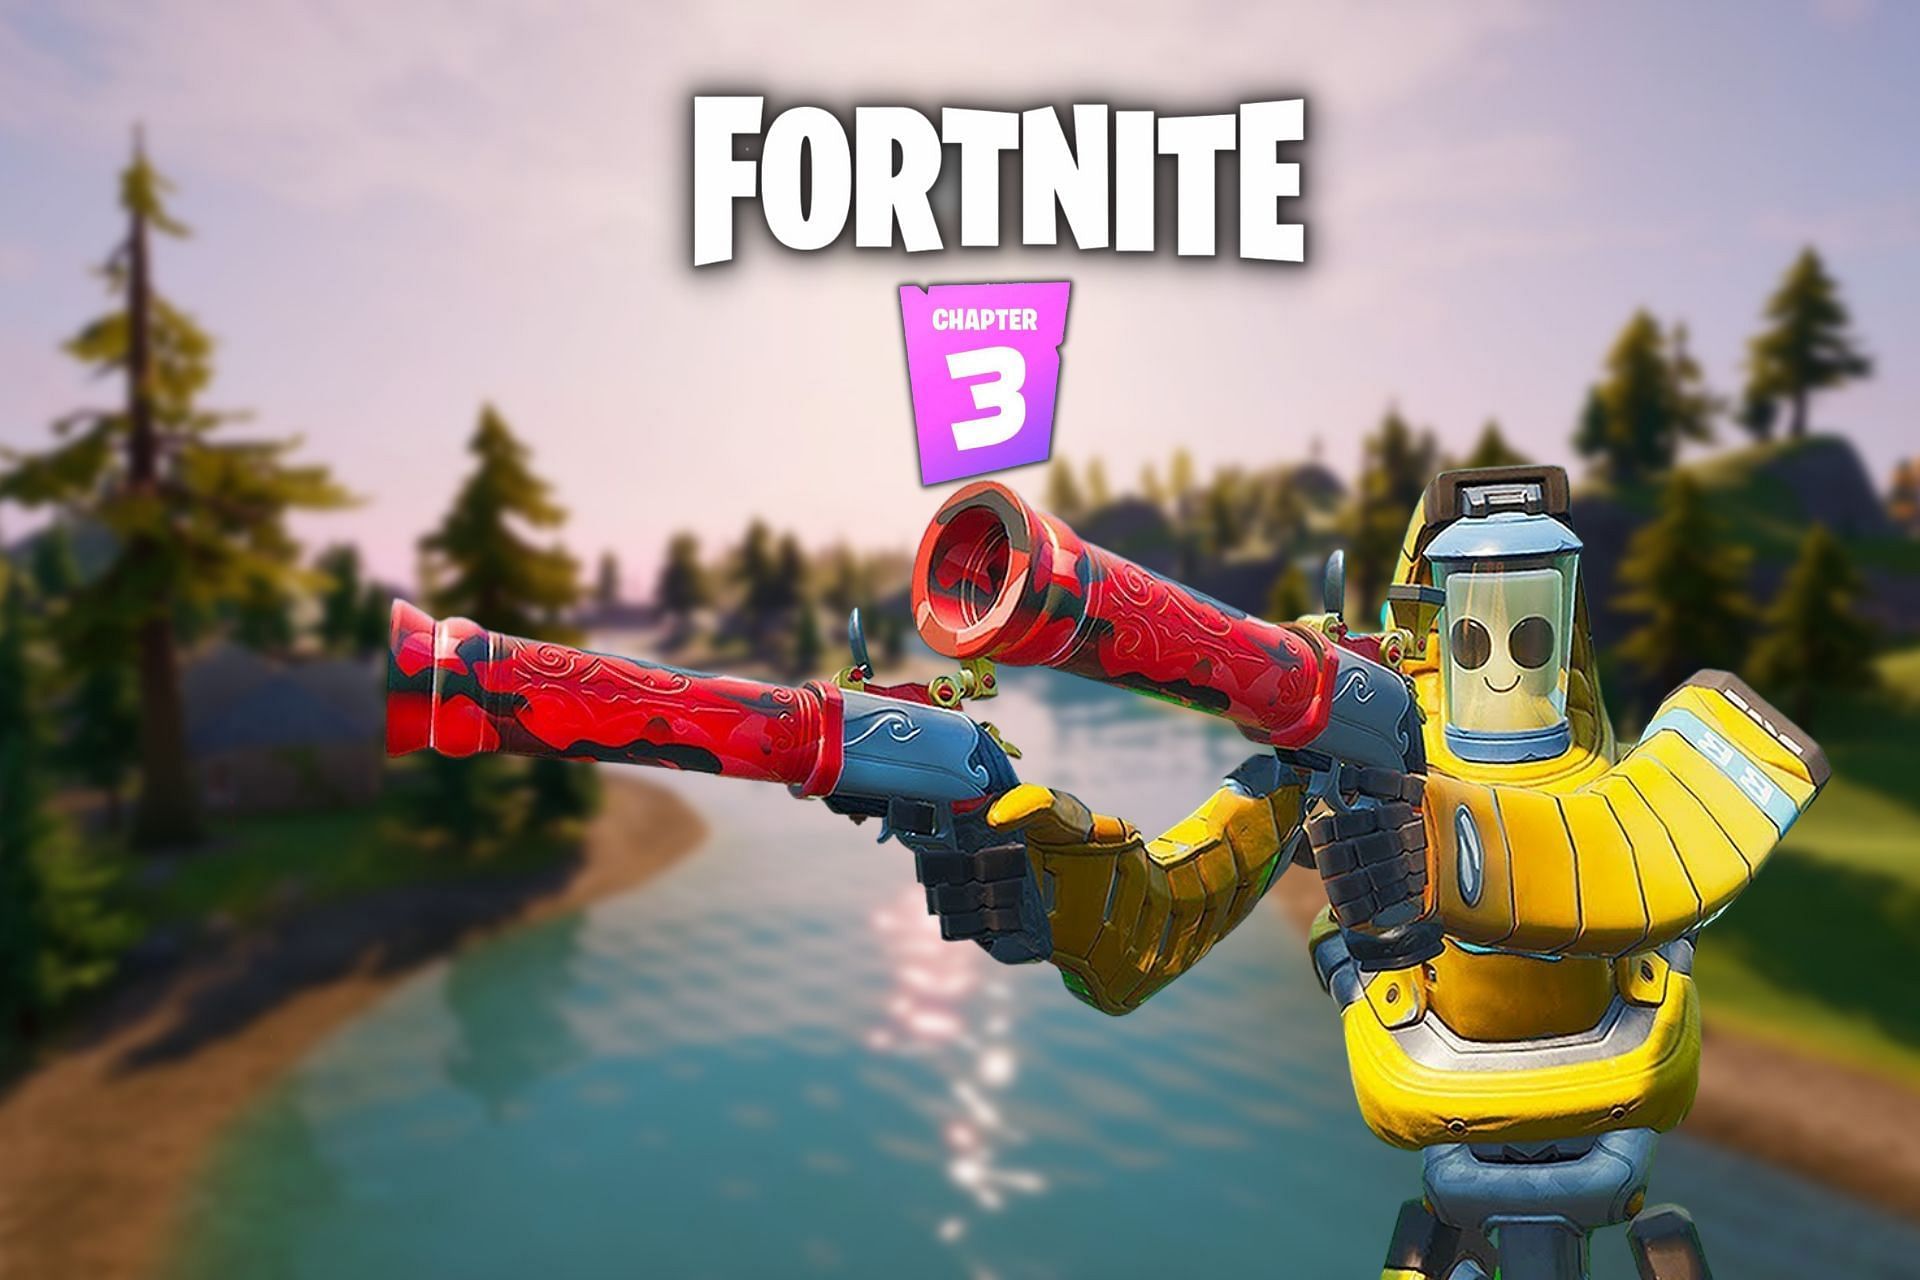 The upcoming Fortnite Chapter 3 weapon seems very overpowered (Image via Sportskeeda)